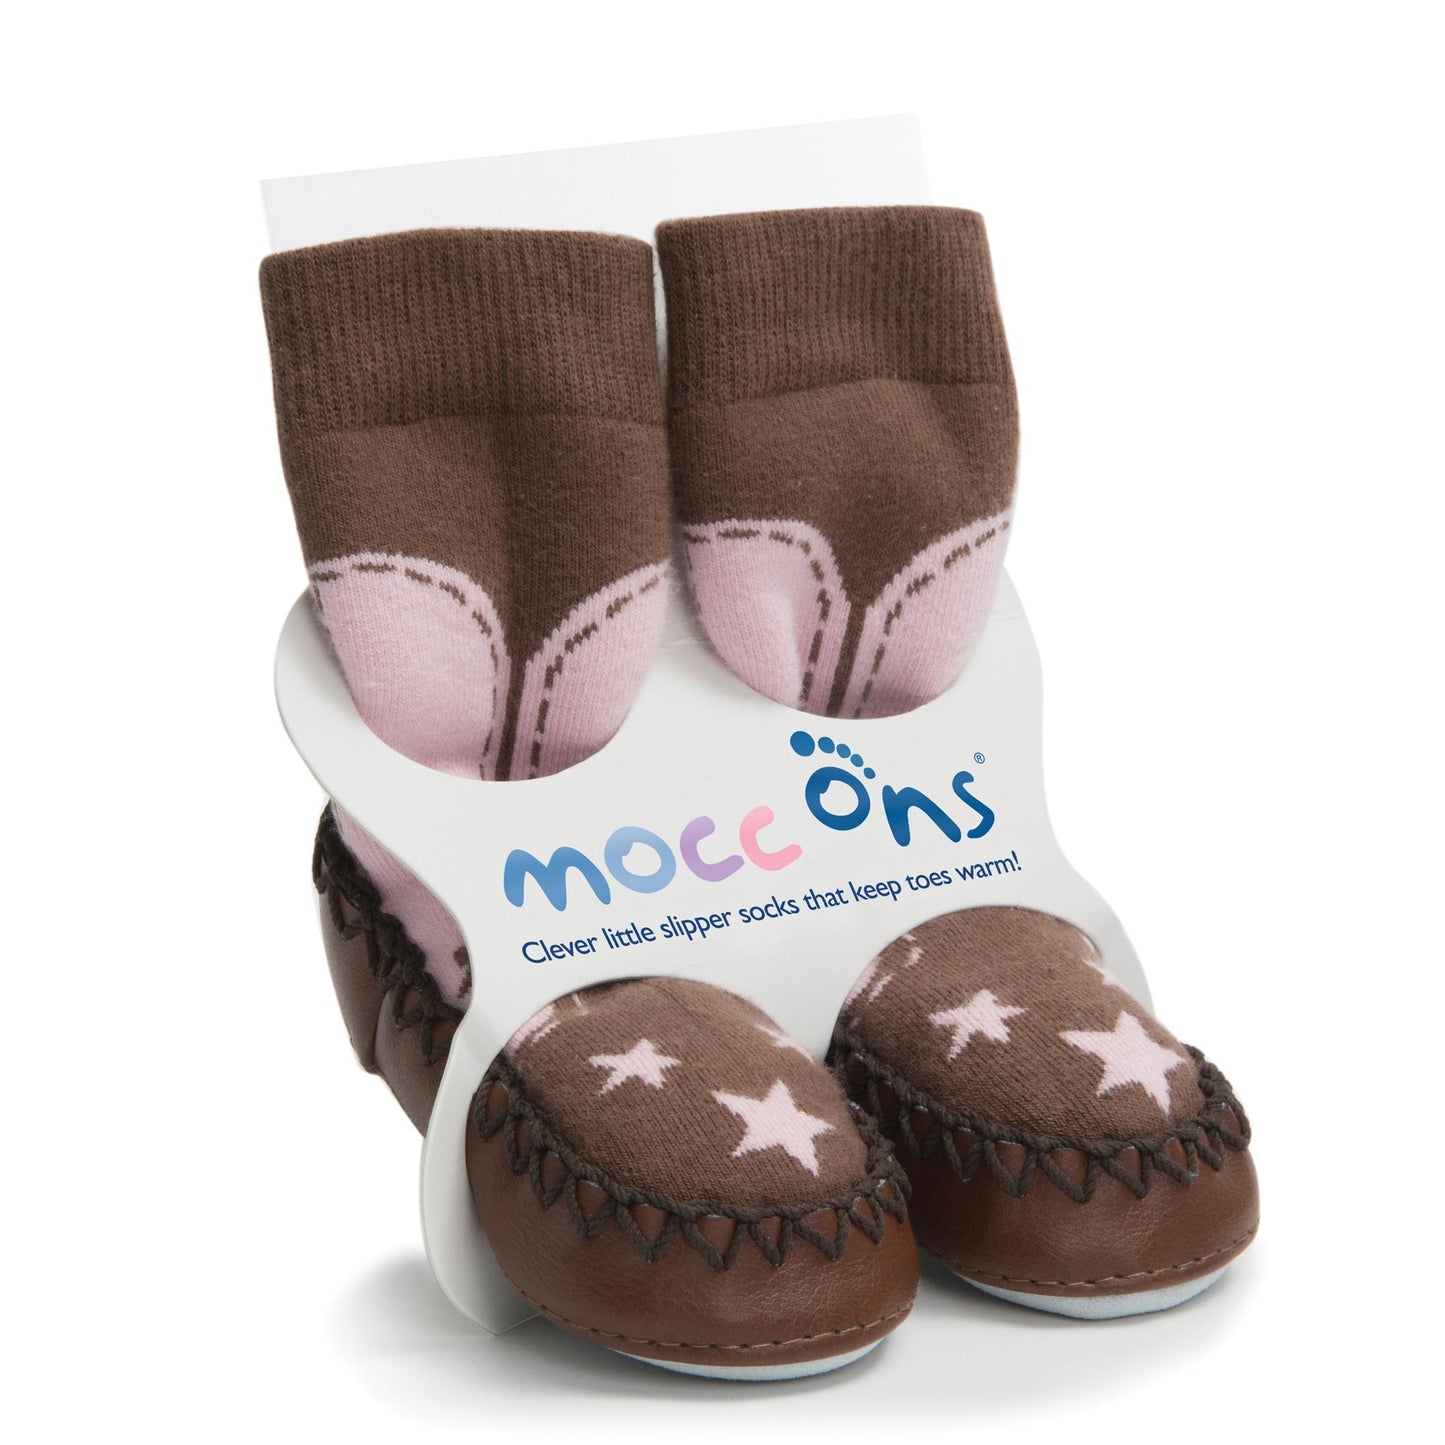 Moccasin style slipper socks that ensure babies and toddlers have warm and comfortable feet throughout the year.